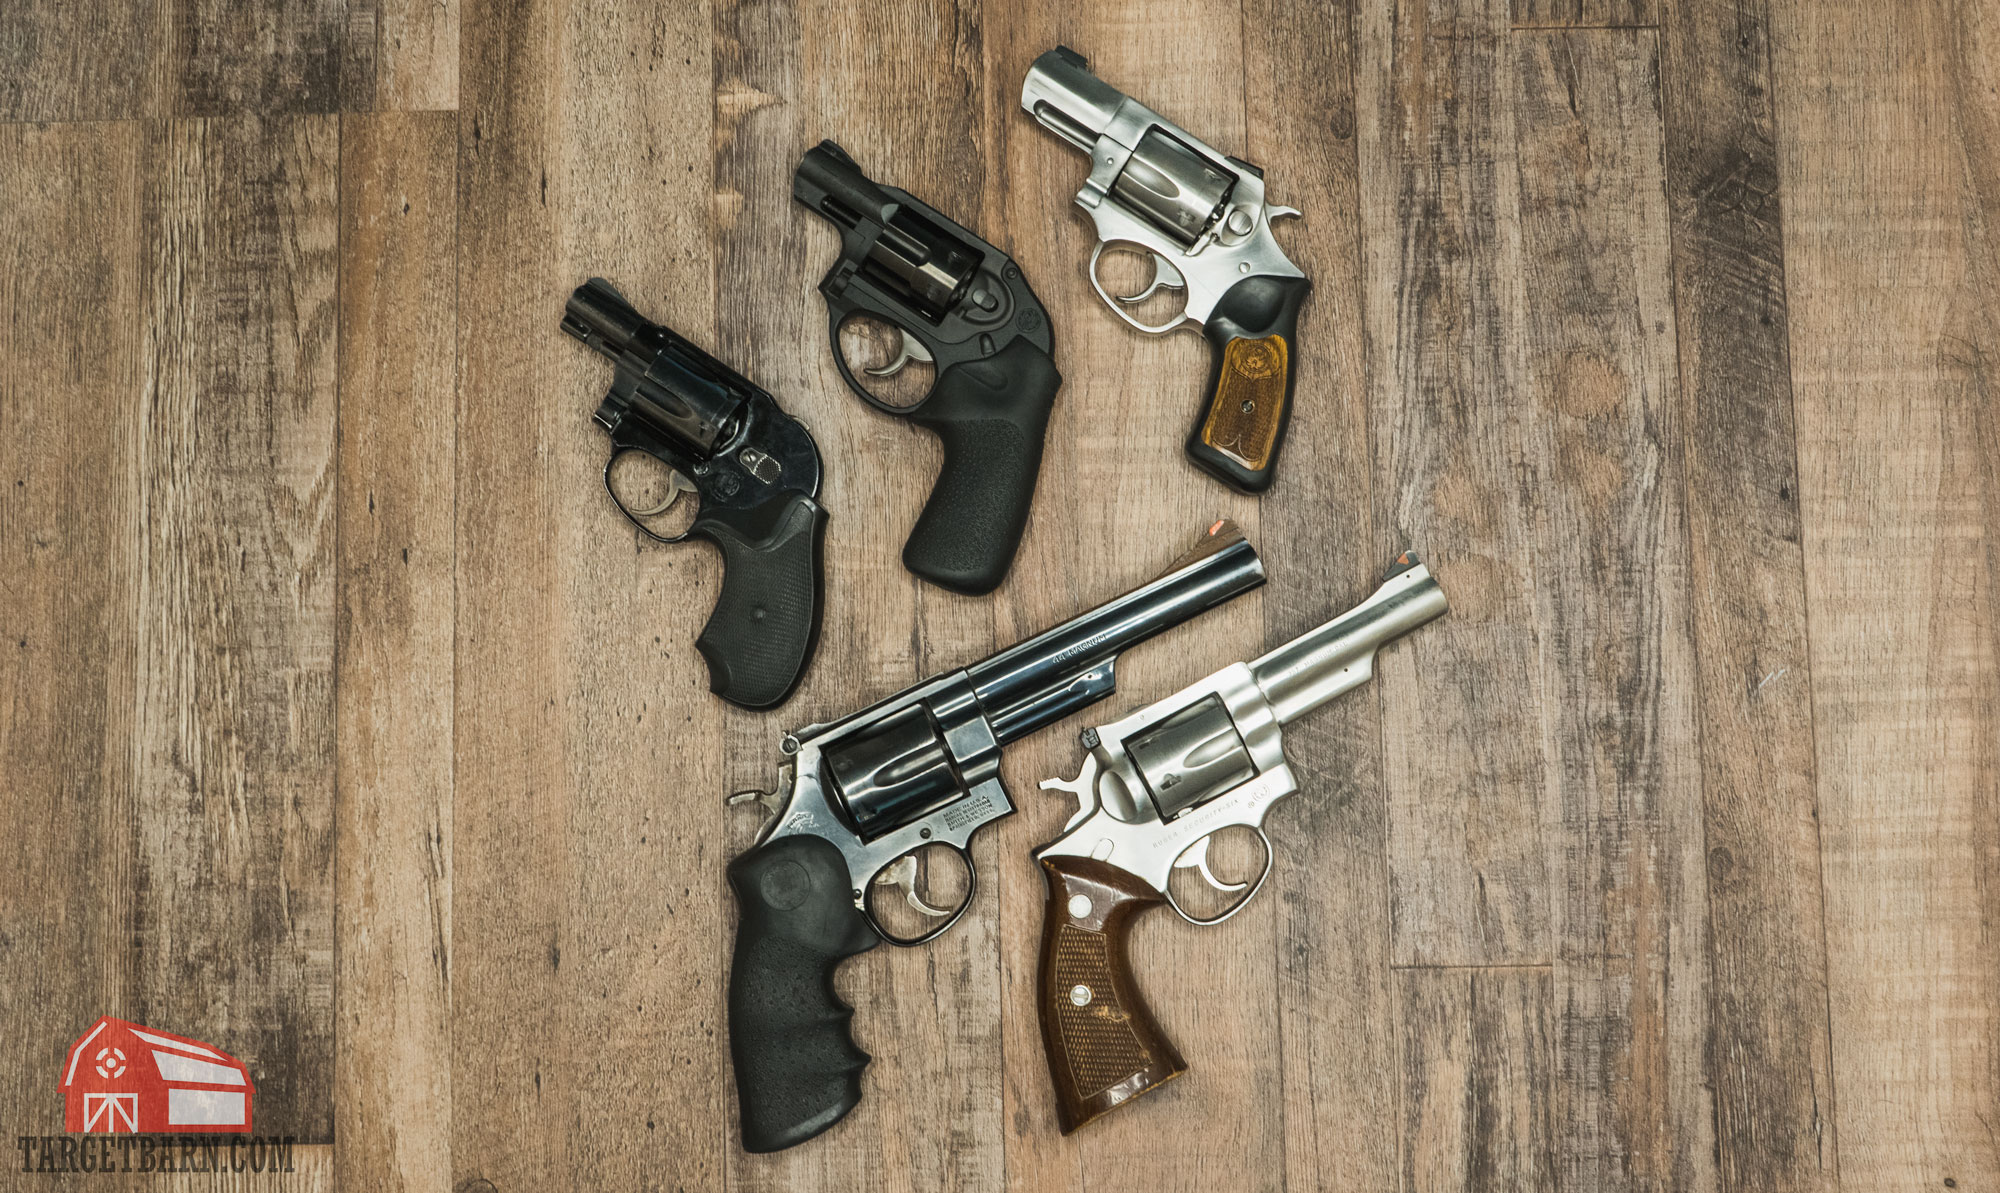 5 revolvers of various calibers and sizes